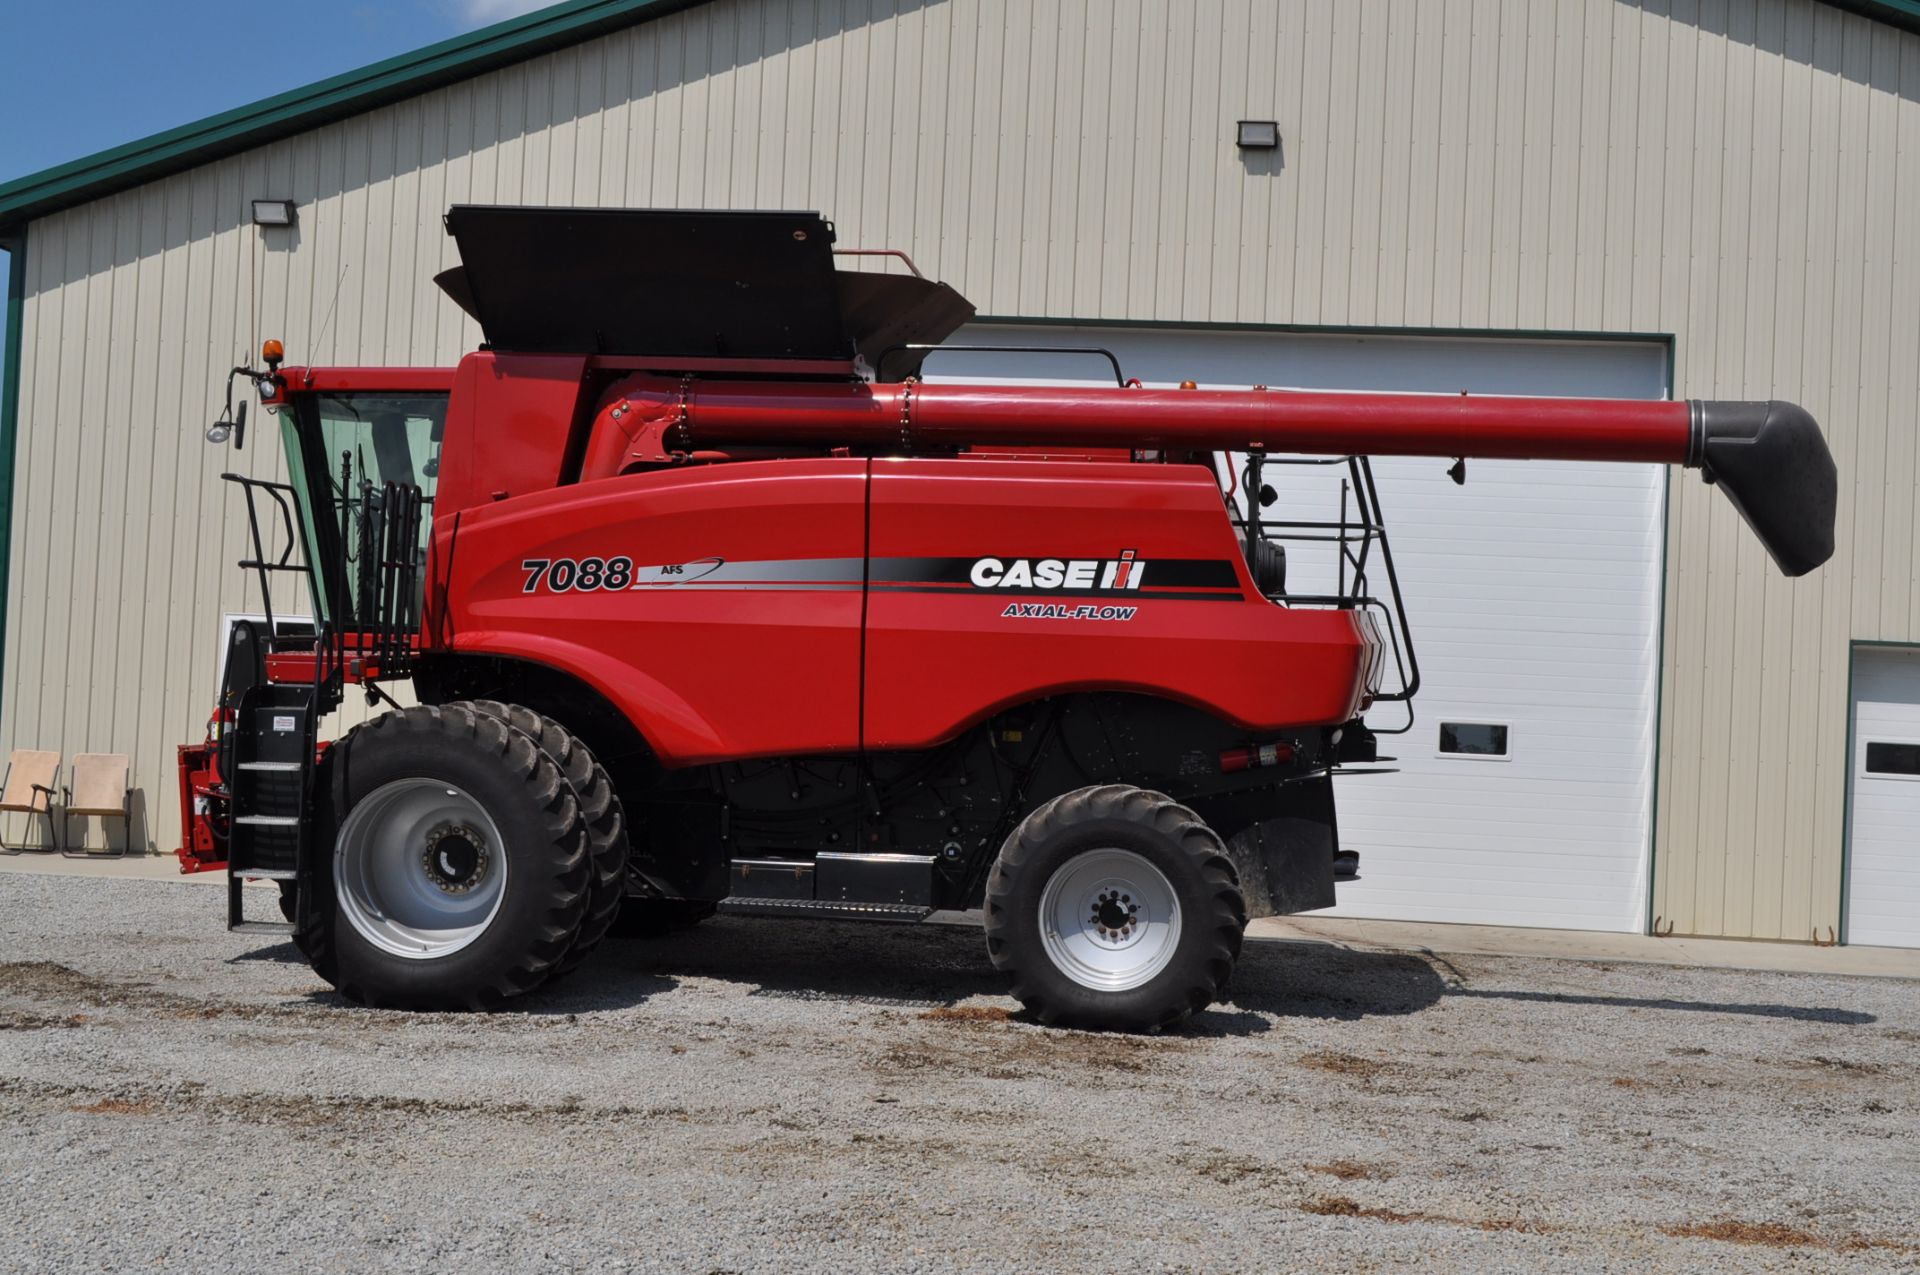 Case International 7088 combine, 520/85 R 38 straddle duals, 540/65 R 30 rear, 2WD field tracker, - Image 24 of 24